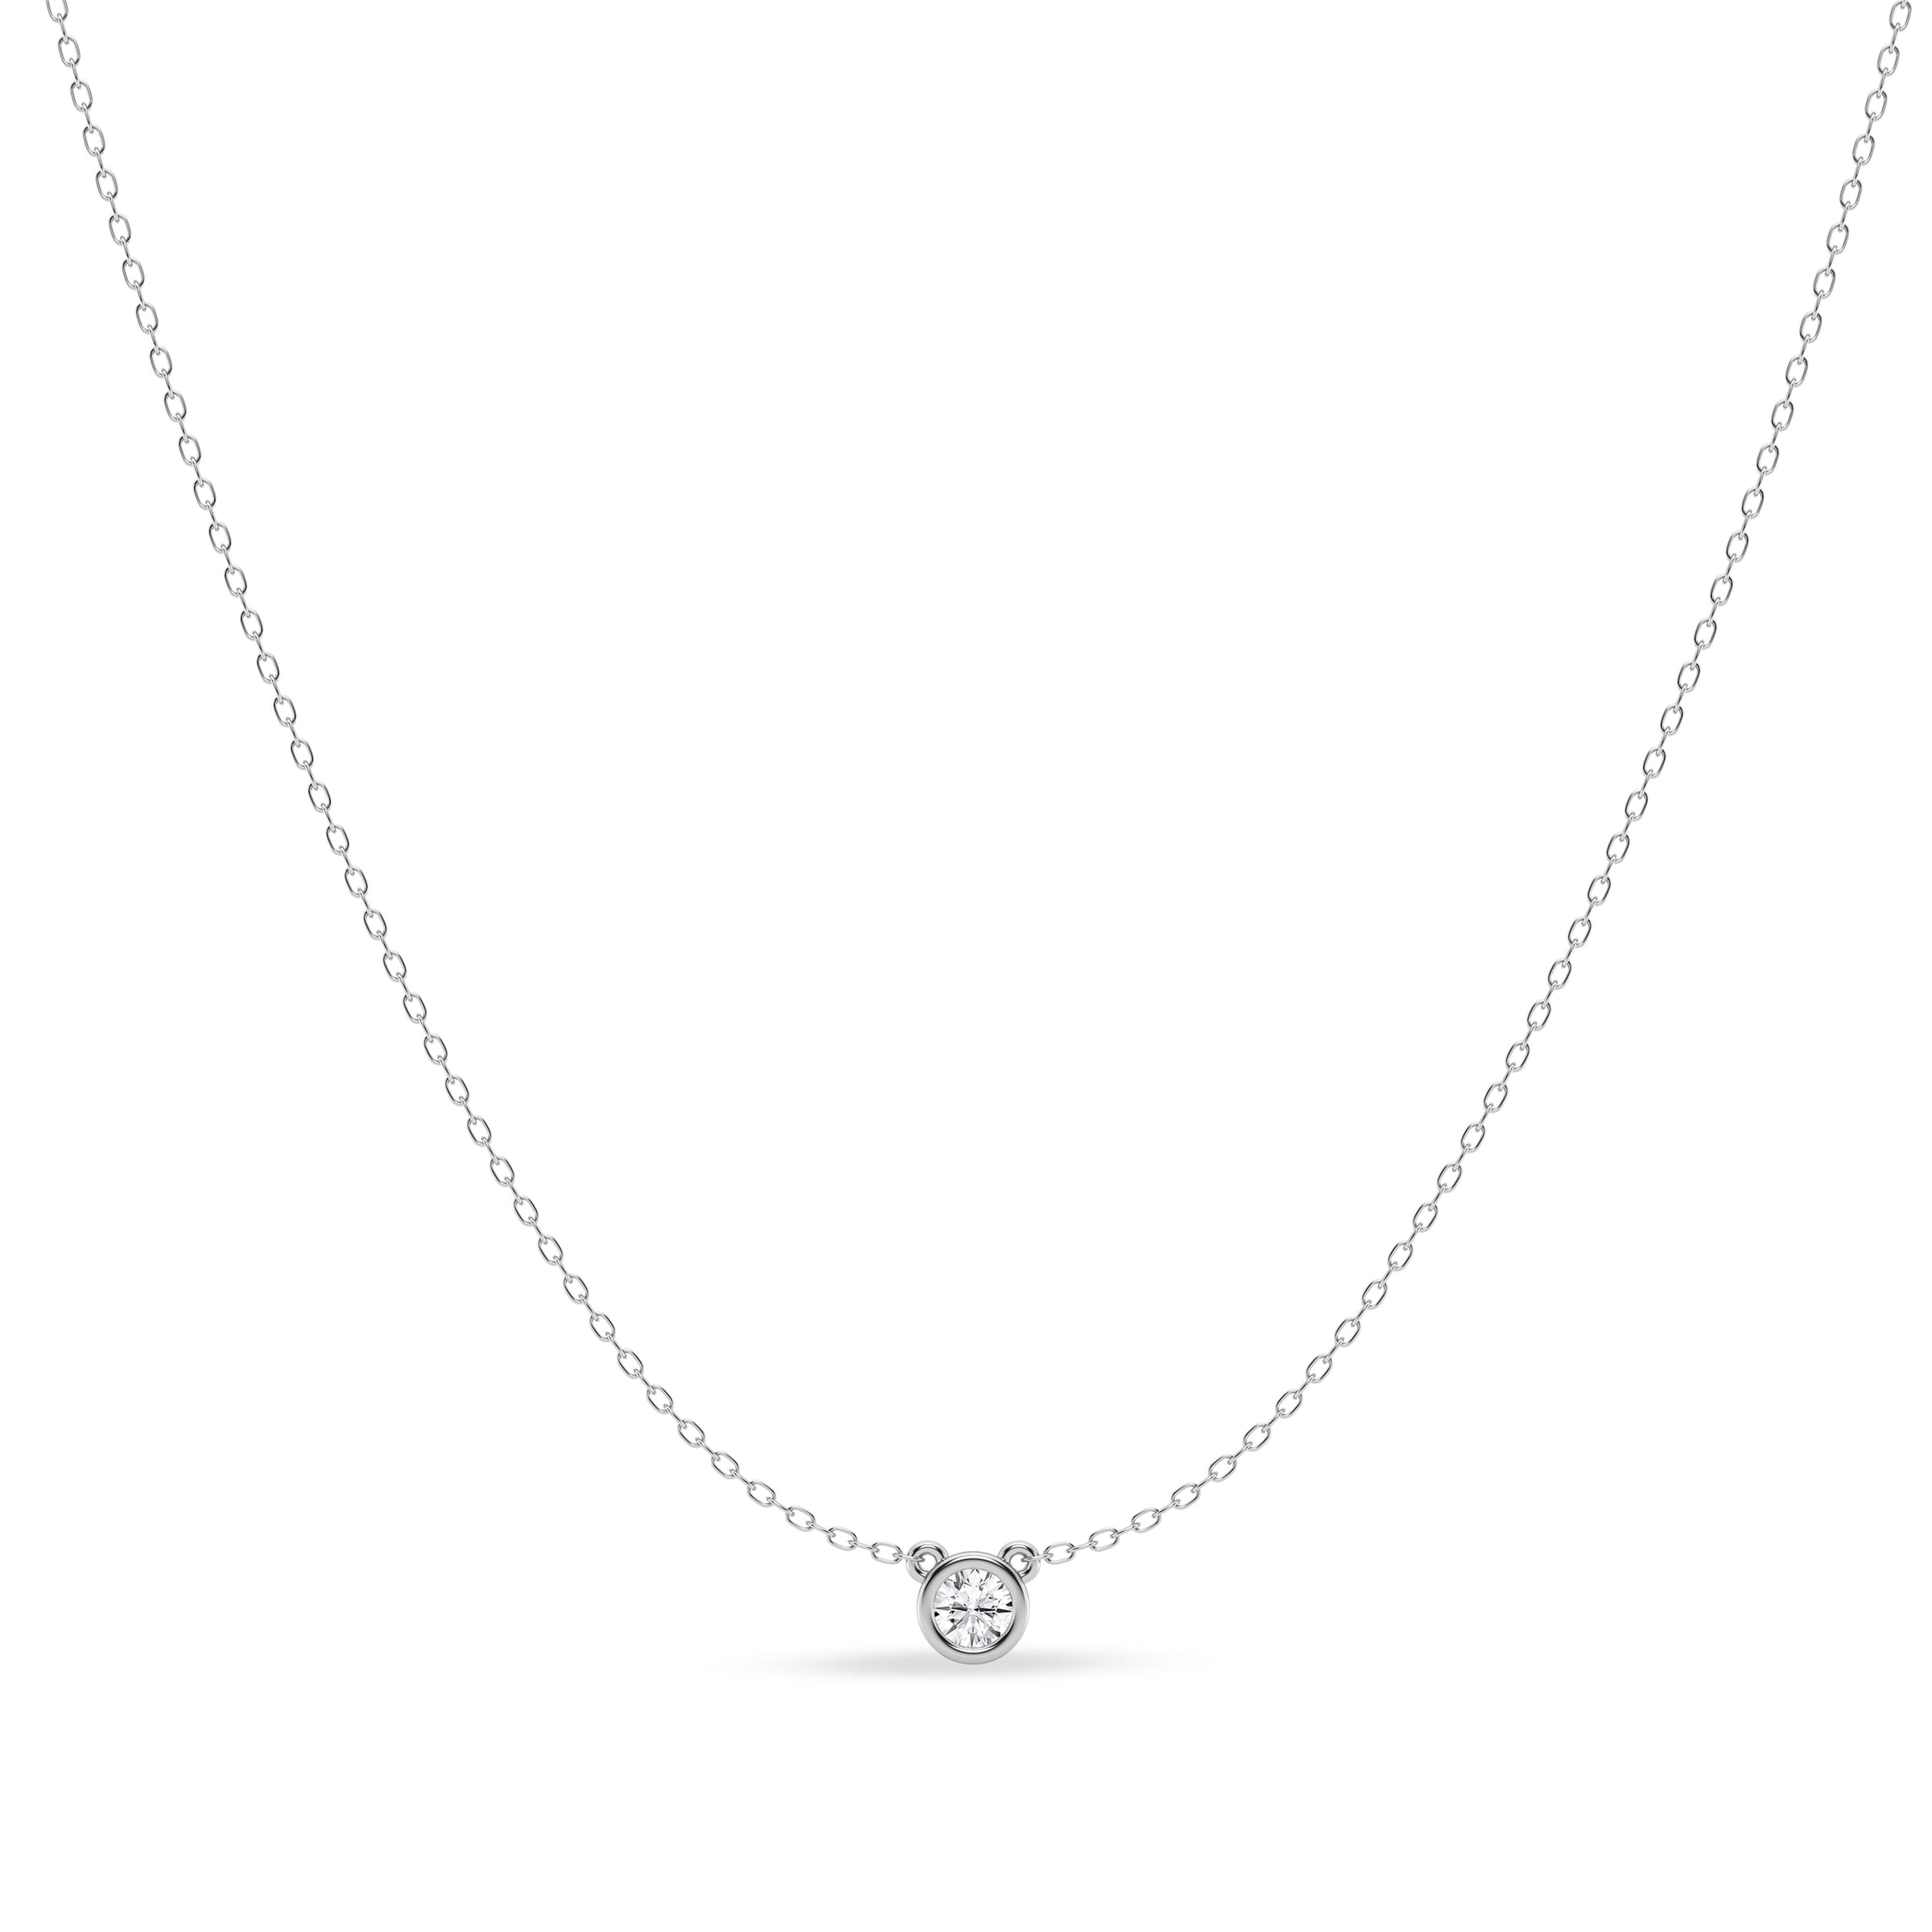 Mirage Slider Necklace with 1/4ct of Laboratory Grown Diamonds in Sterling Silver and Platinum Necklaces Bevilles 